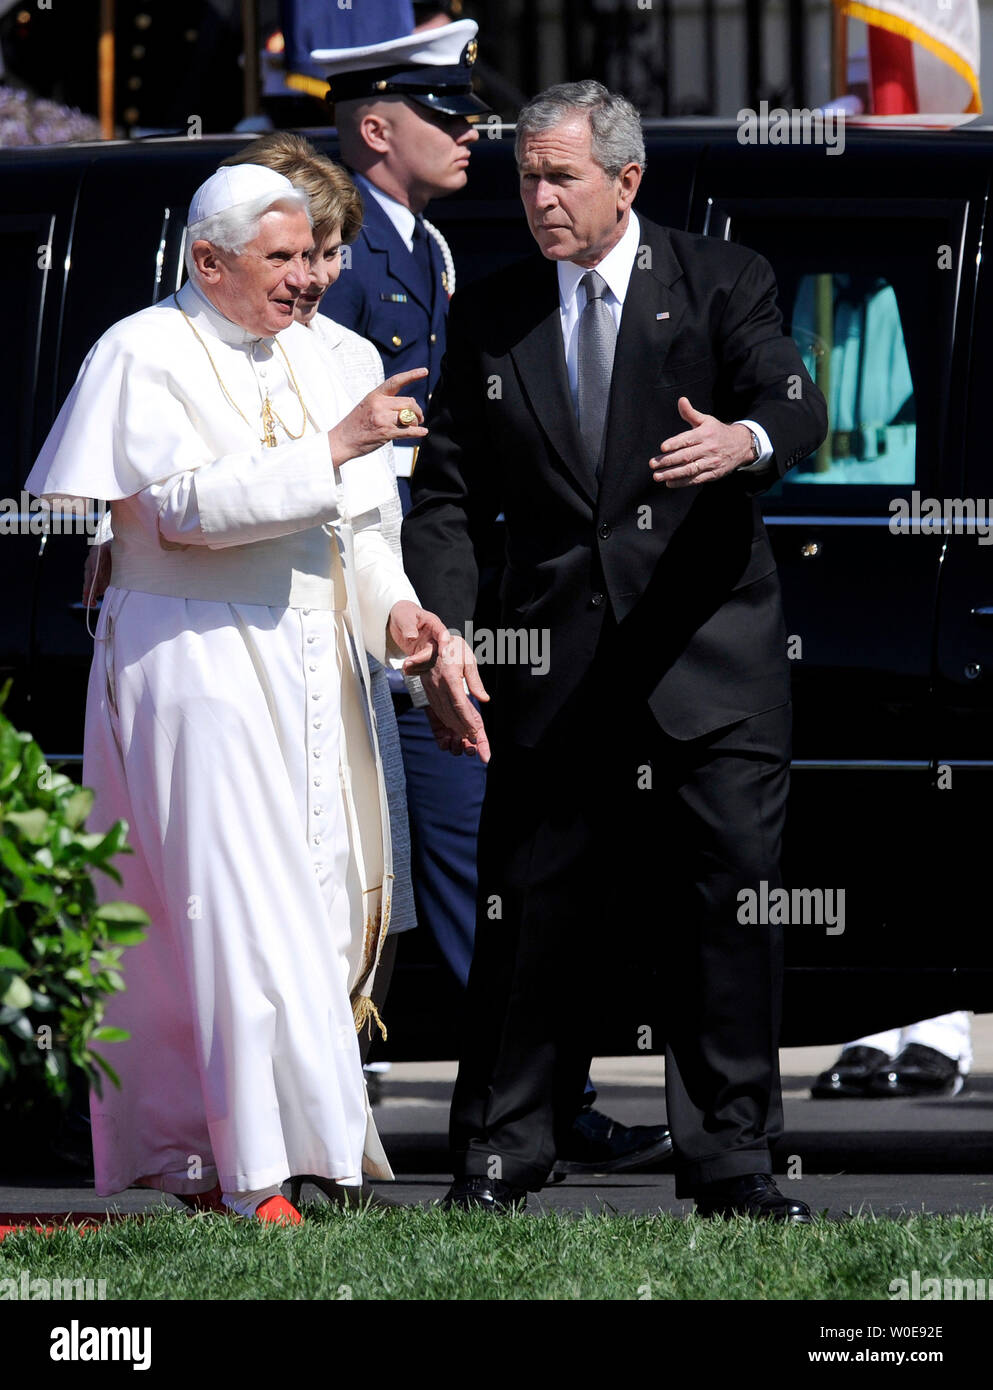 U.S. President George W. Bush welcomes Pope Benedict XVI to an official welcoming ceremony on the South Lawn of the White House in Washington on April 16, 2008. This is the Pope's first visit to the United States and only the second visit in history by a Pope to the White House. (UPI Photo/Kevin Dietsch) Stock Photo